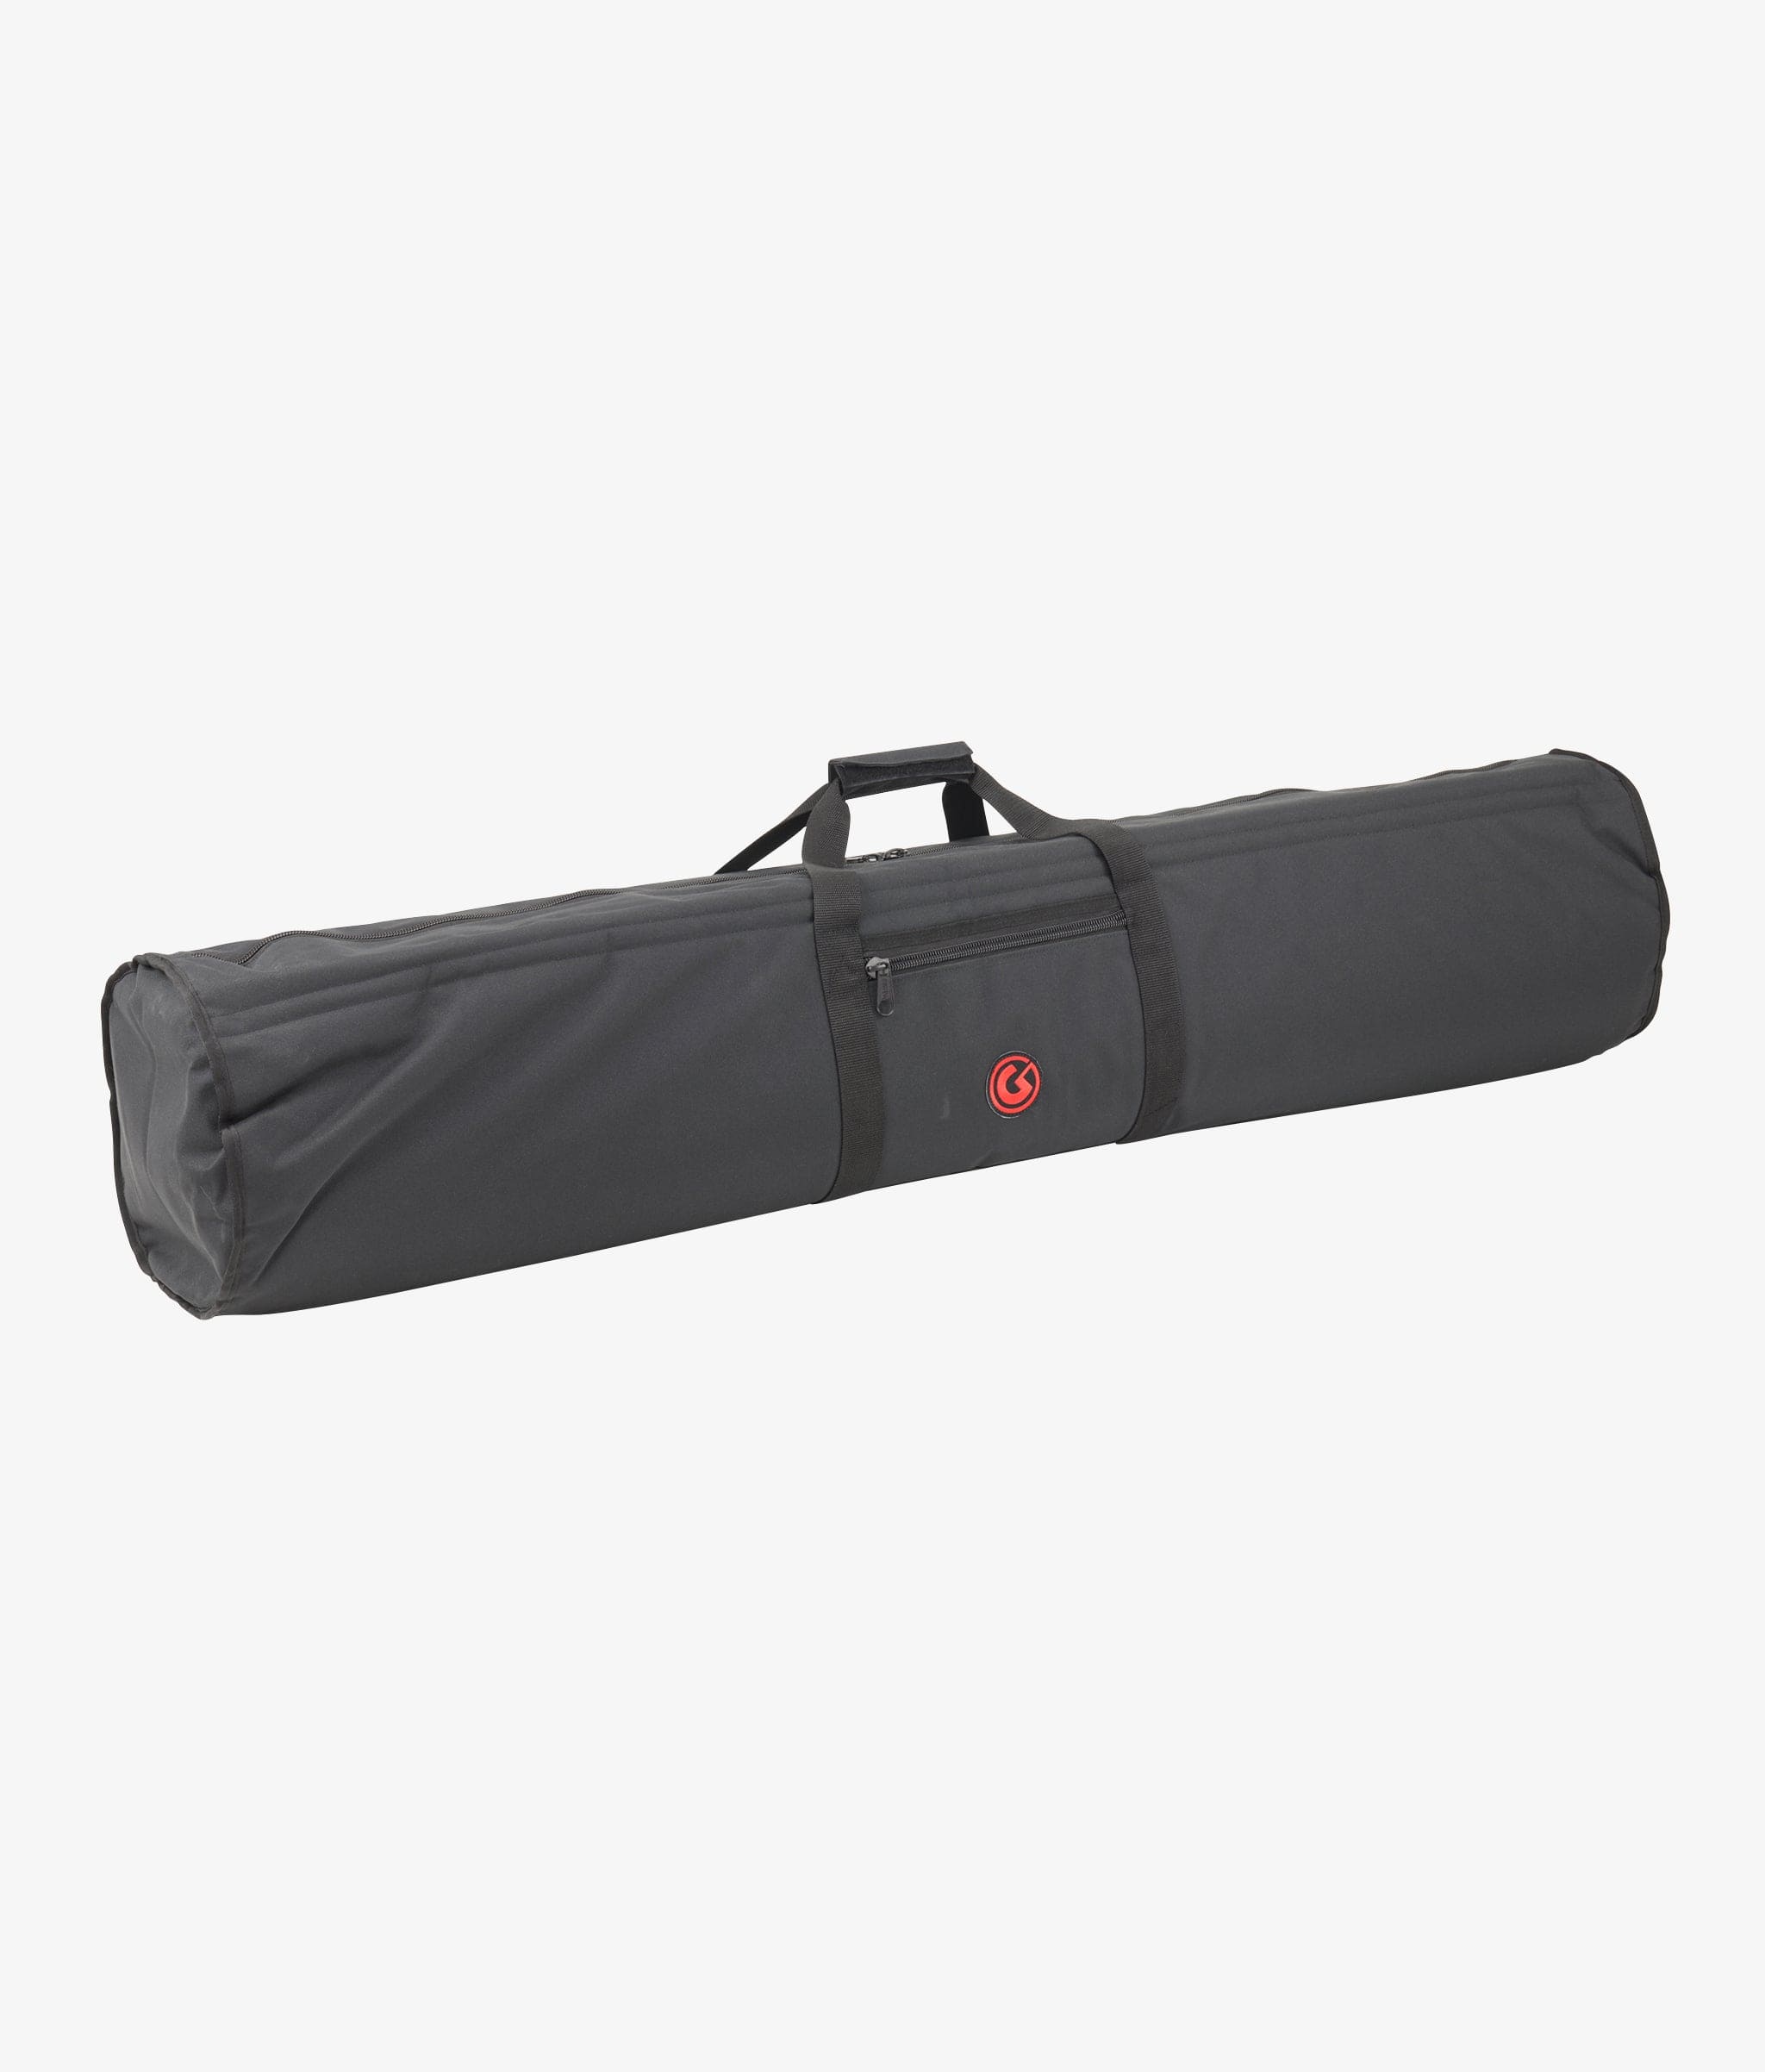 Hardware Bags & Cases - Gator Cases